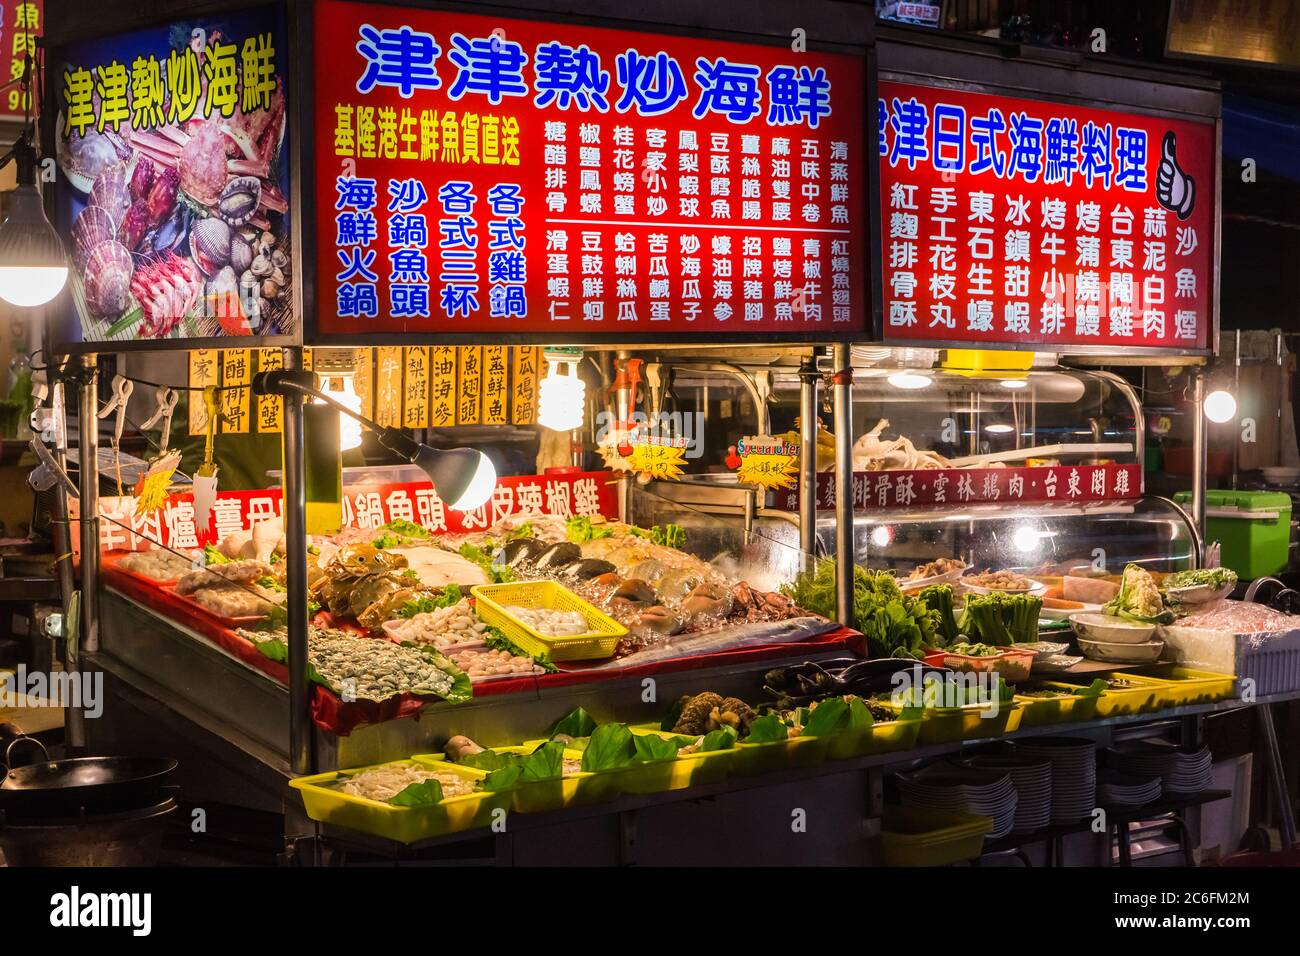 Taipei, Taiwan - Dec. 24th, 2018: A seafood stall at Guangzhou Street Night Market in Taipei's oldest district Wanhua offers a wide range of fish and Stock Photo